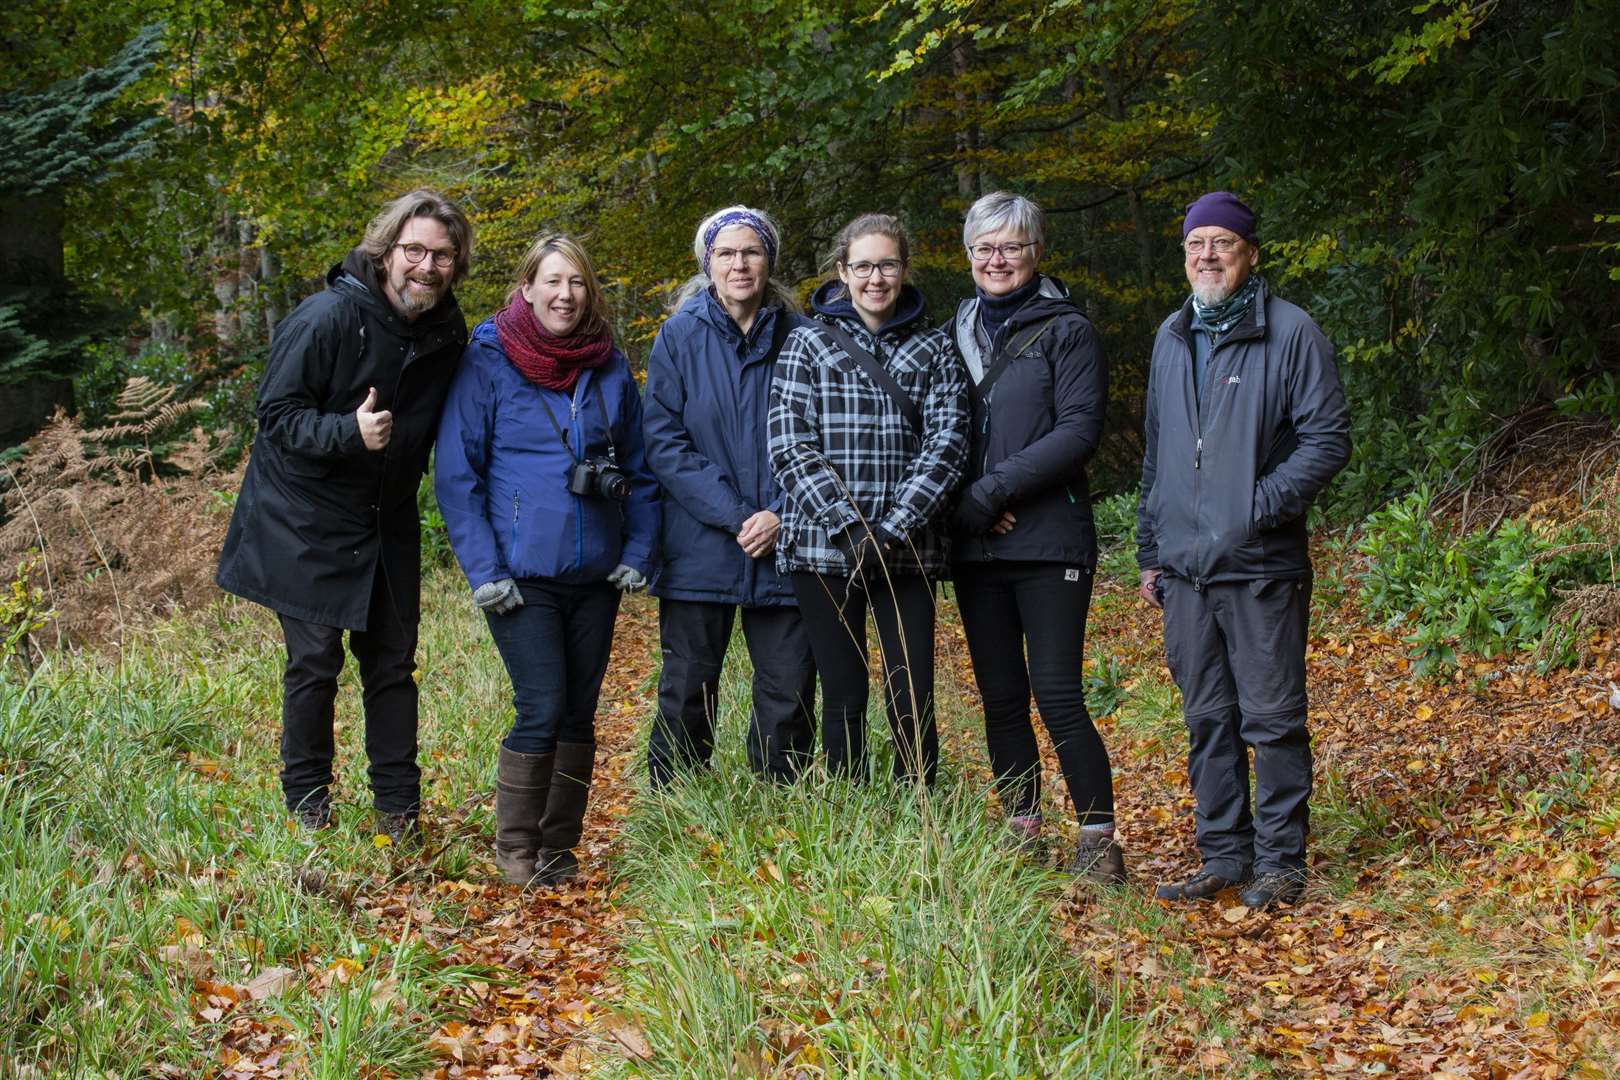 Local photographers Nick Gibbons, Becky Cathro, Joanna Taylor, Emma andWendy Menzies, Howard Davenport learning out in the field.